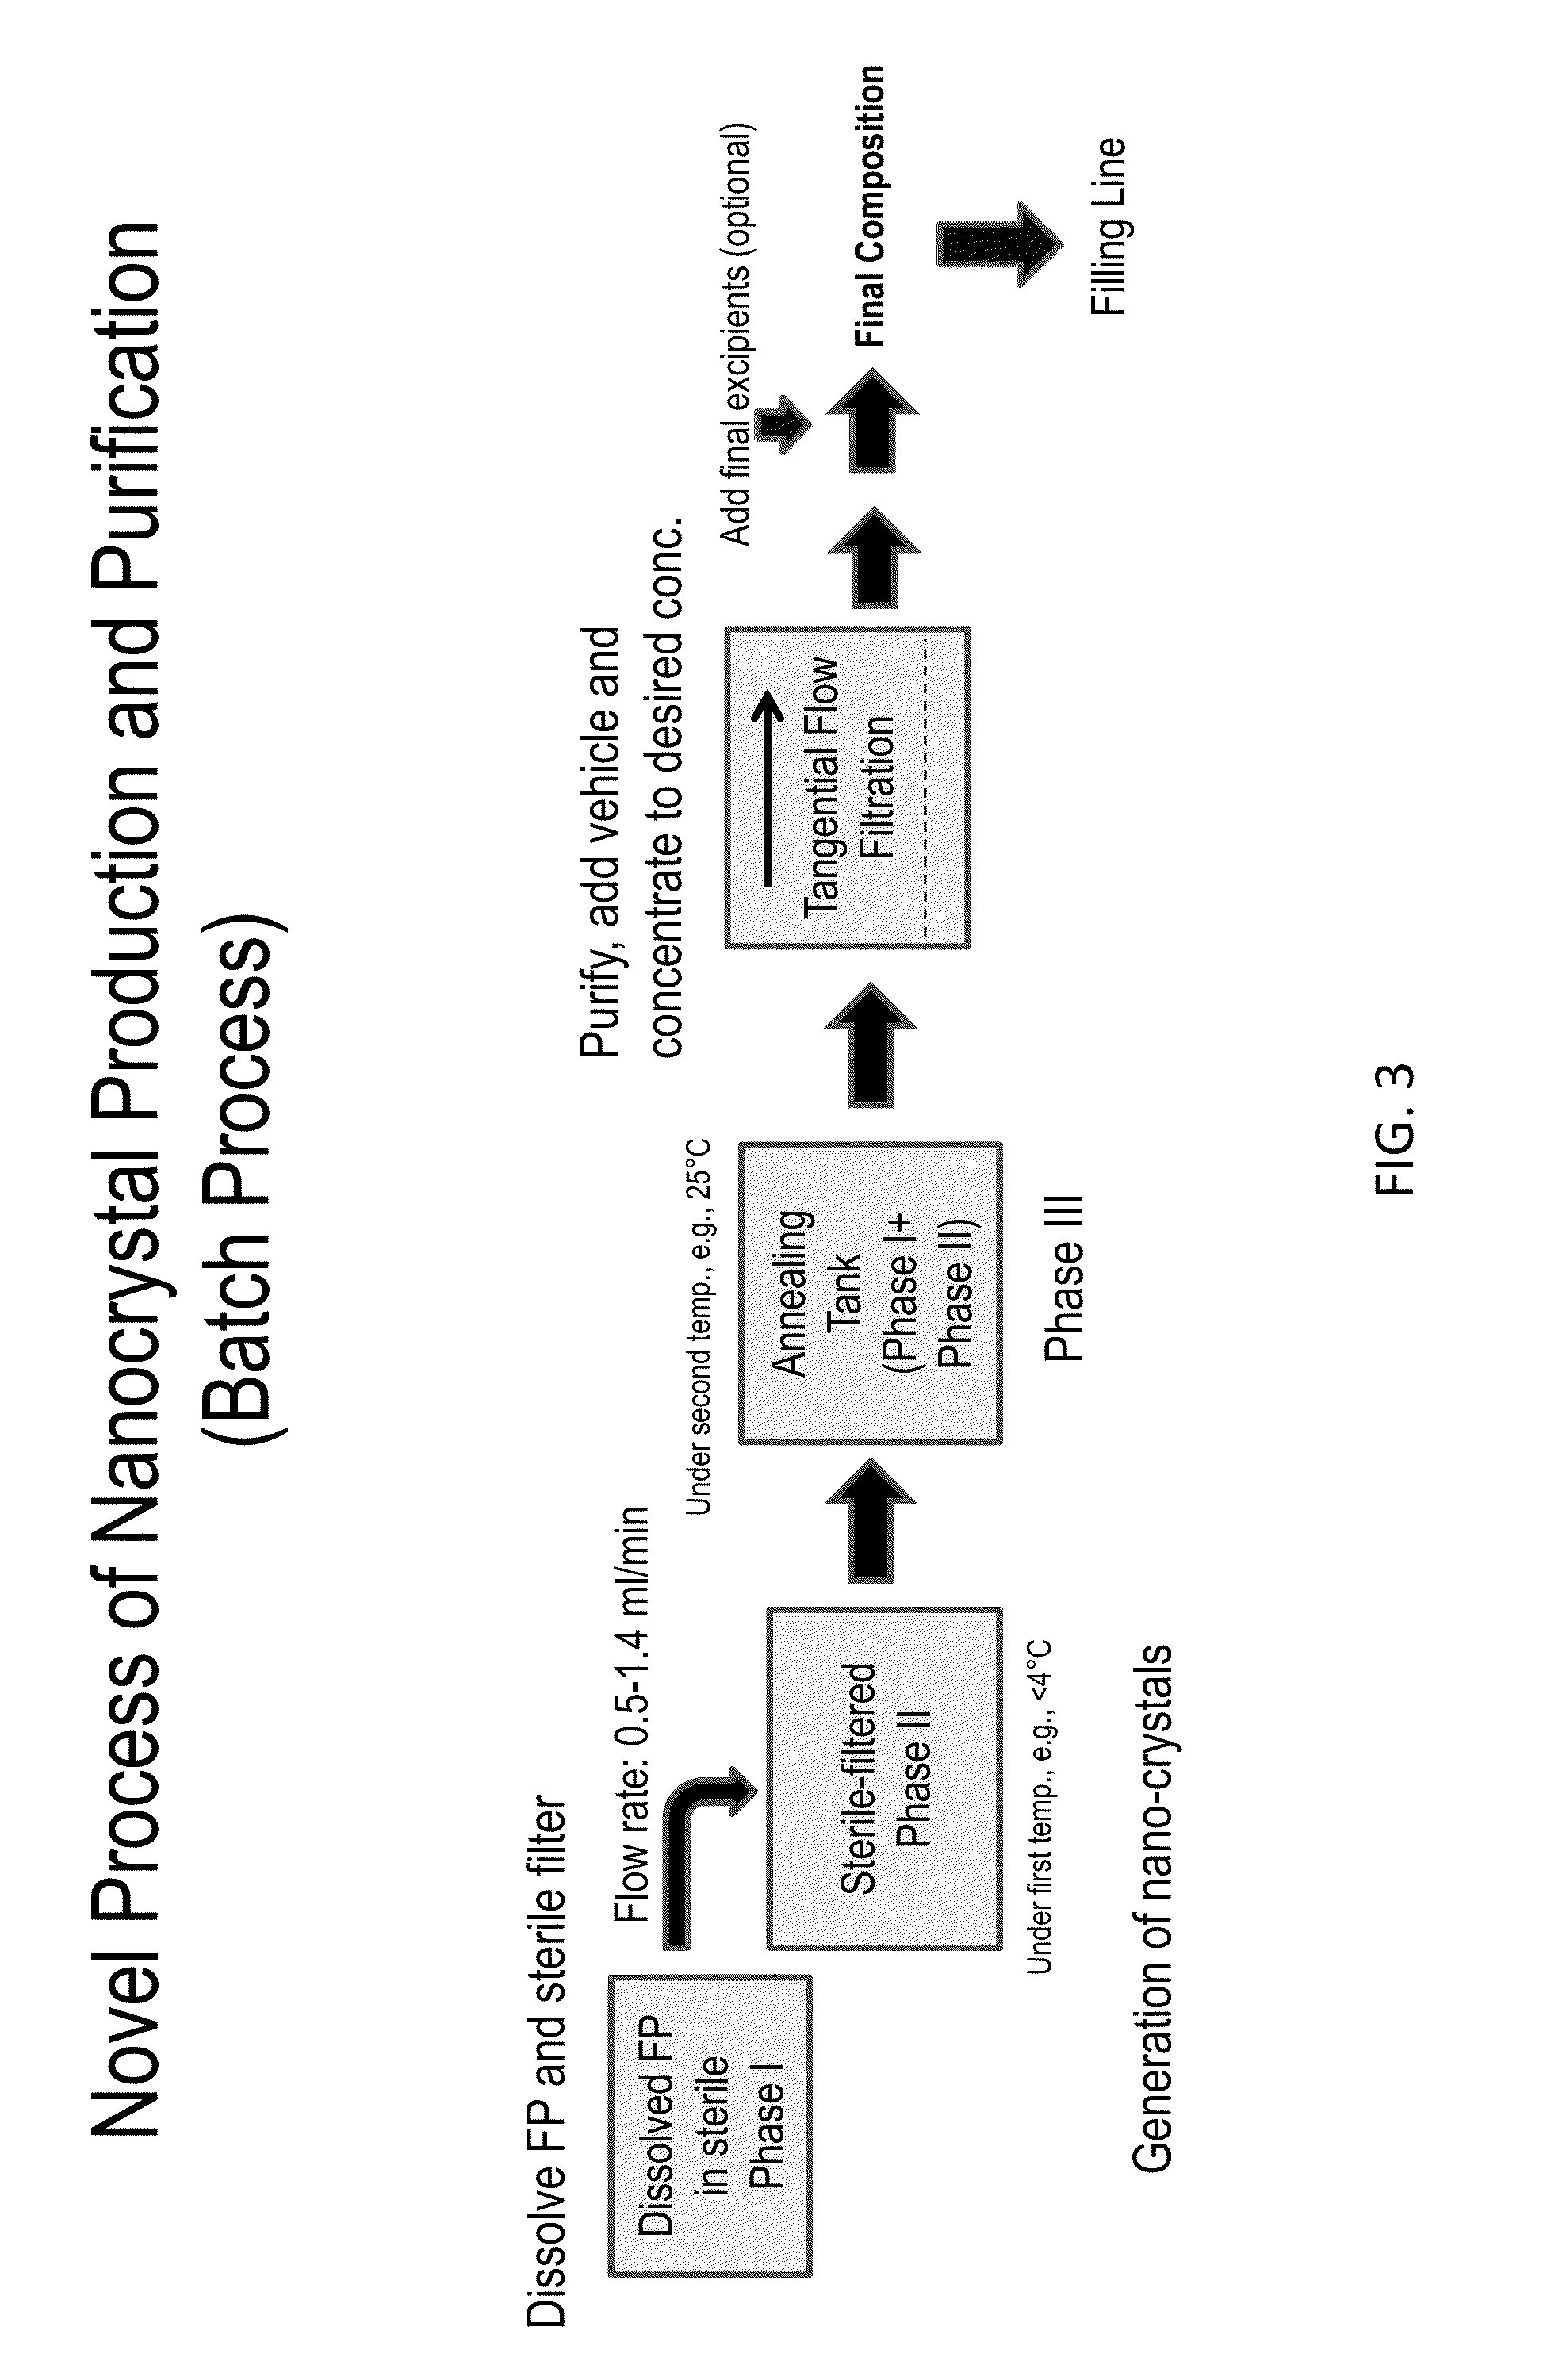 Preparations of Hydrophobic Therapeutic Agents, Methods of Manufacture and Use Thereof